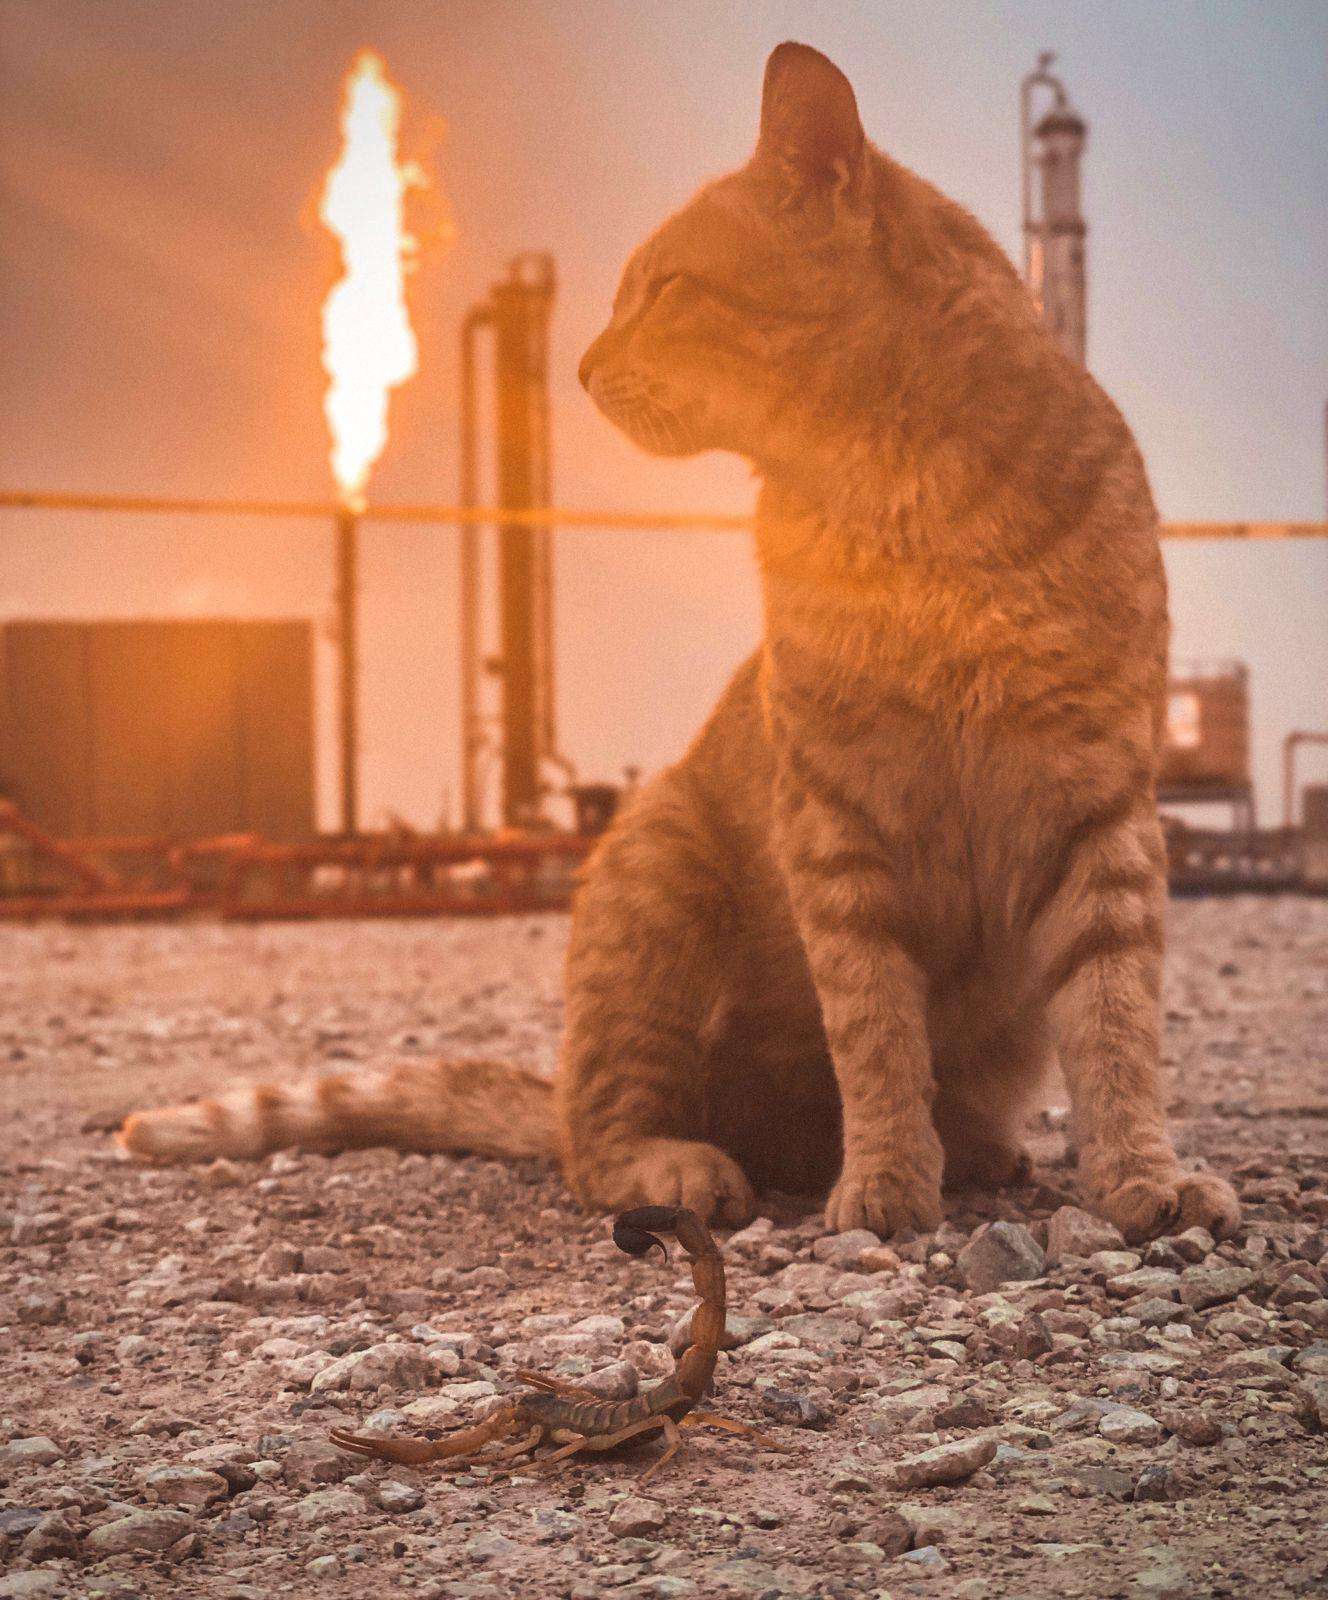 image showing ITAP of The cat, The Scorpion and The Field.